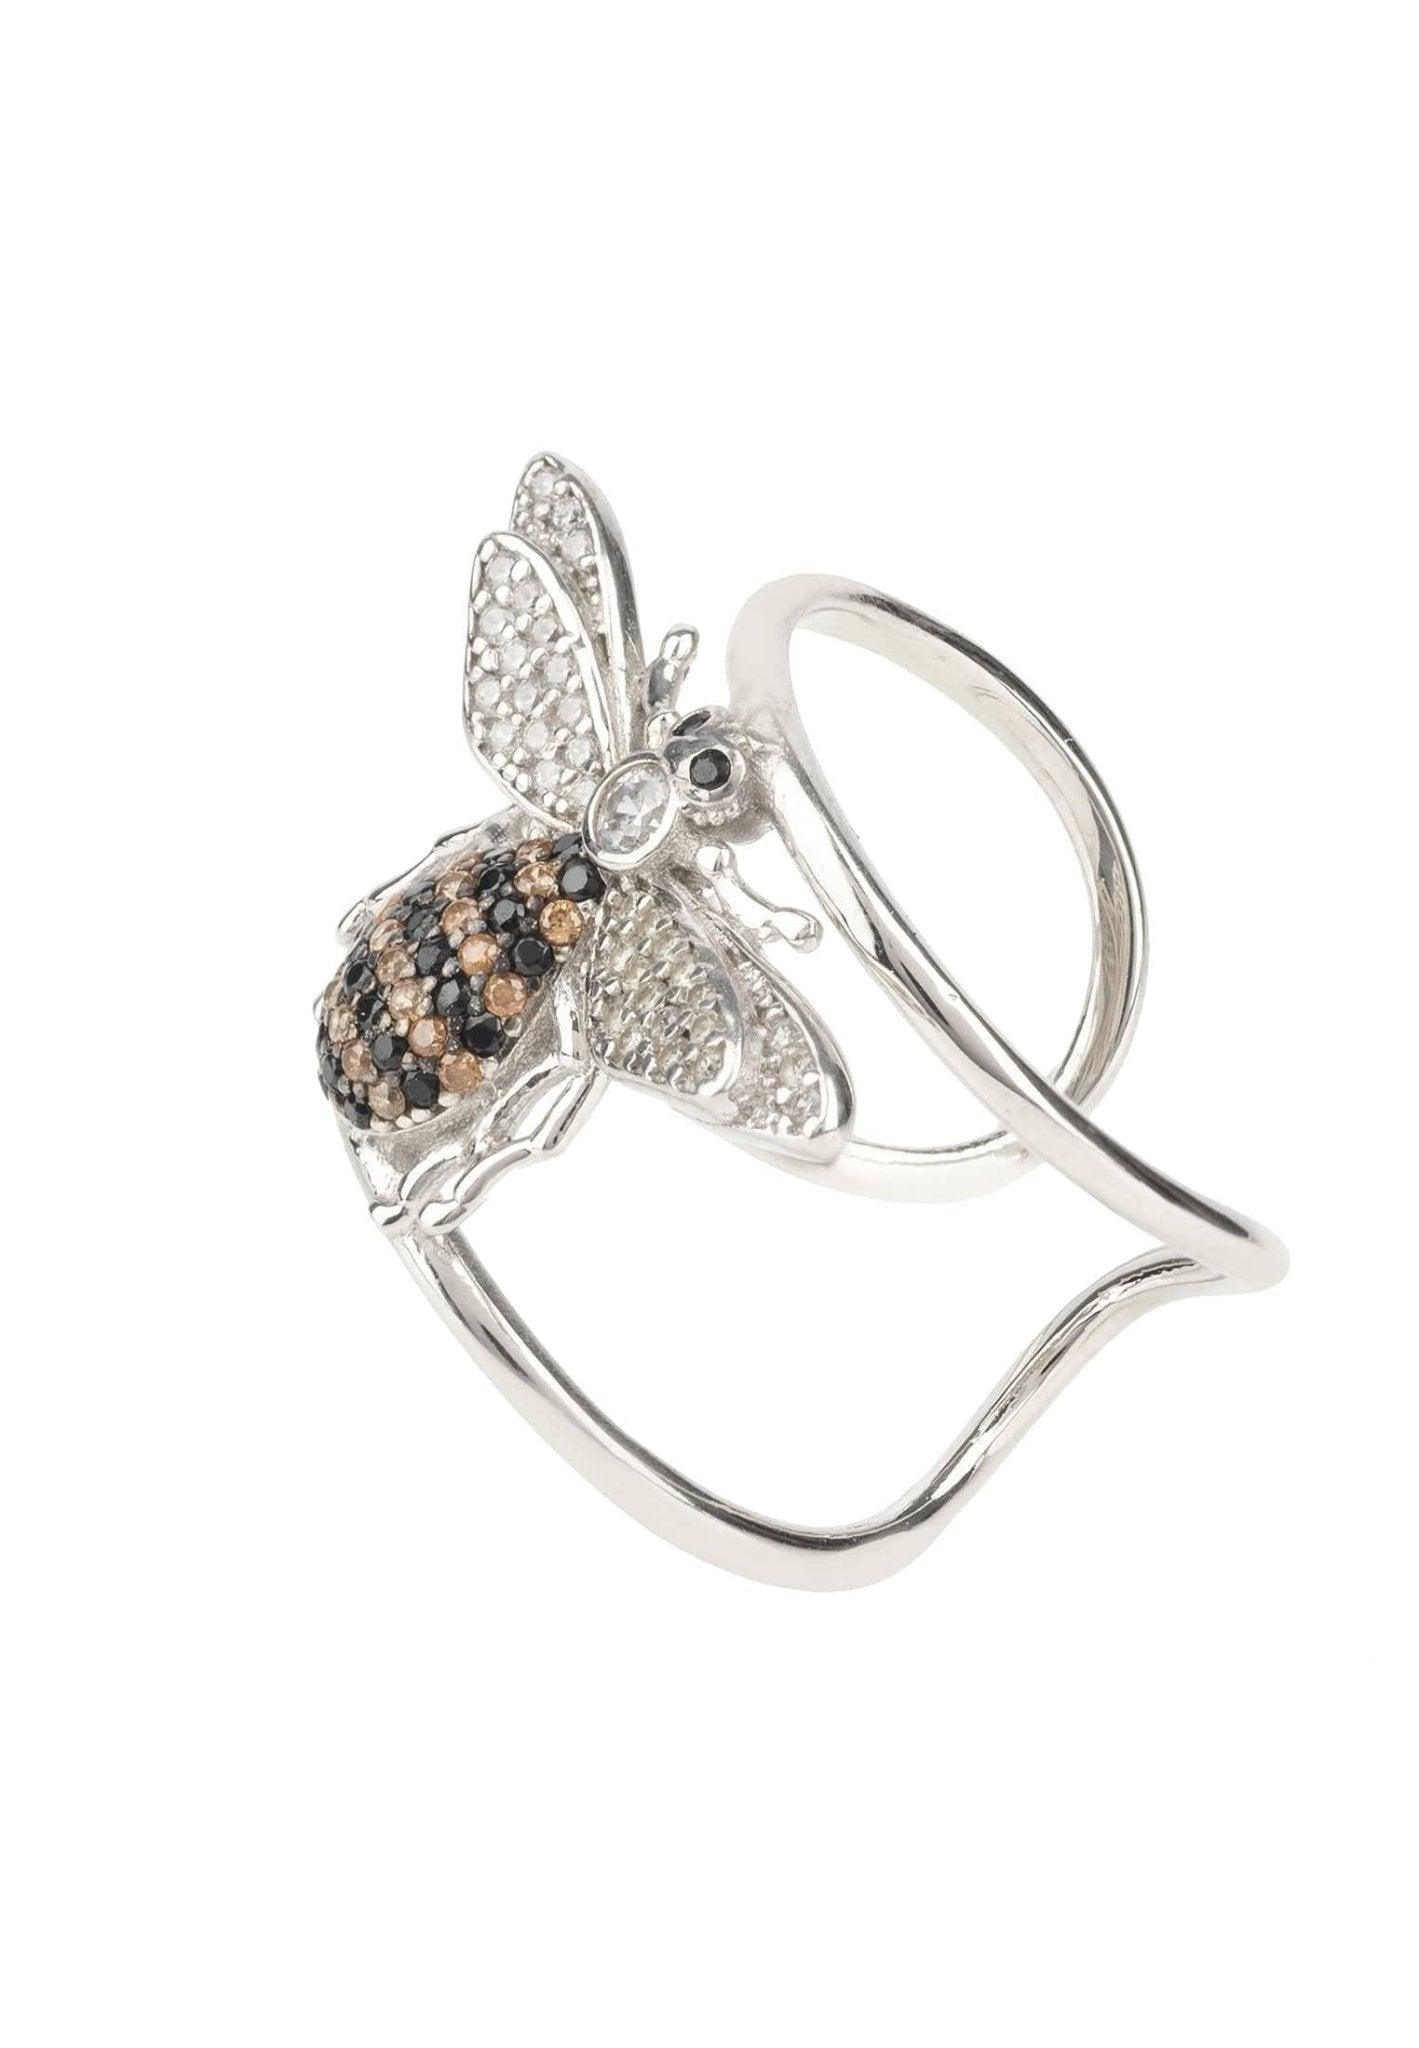 Honey Bee Cocktail Ring Adjustable, Sterling Silver